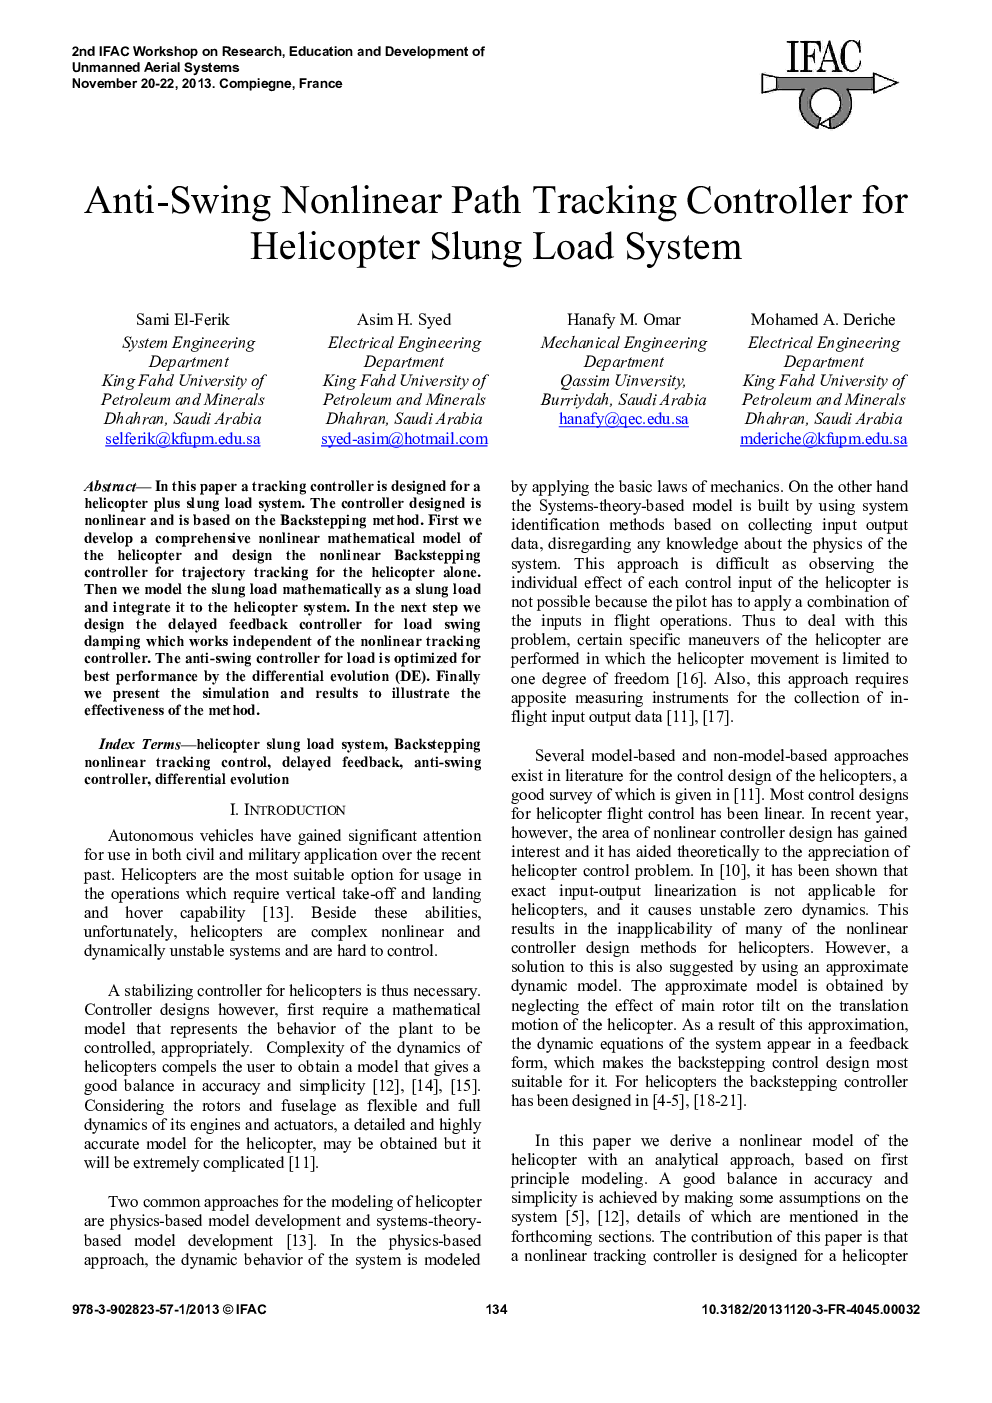 Anti-Swing Nonlinear Path Tracking Controller for Helicopter Slung Load System